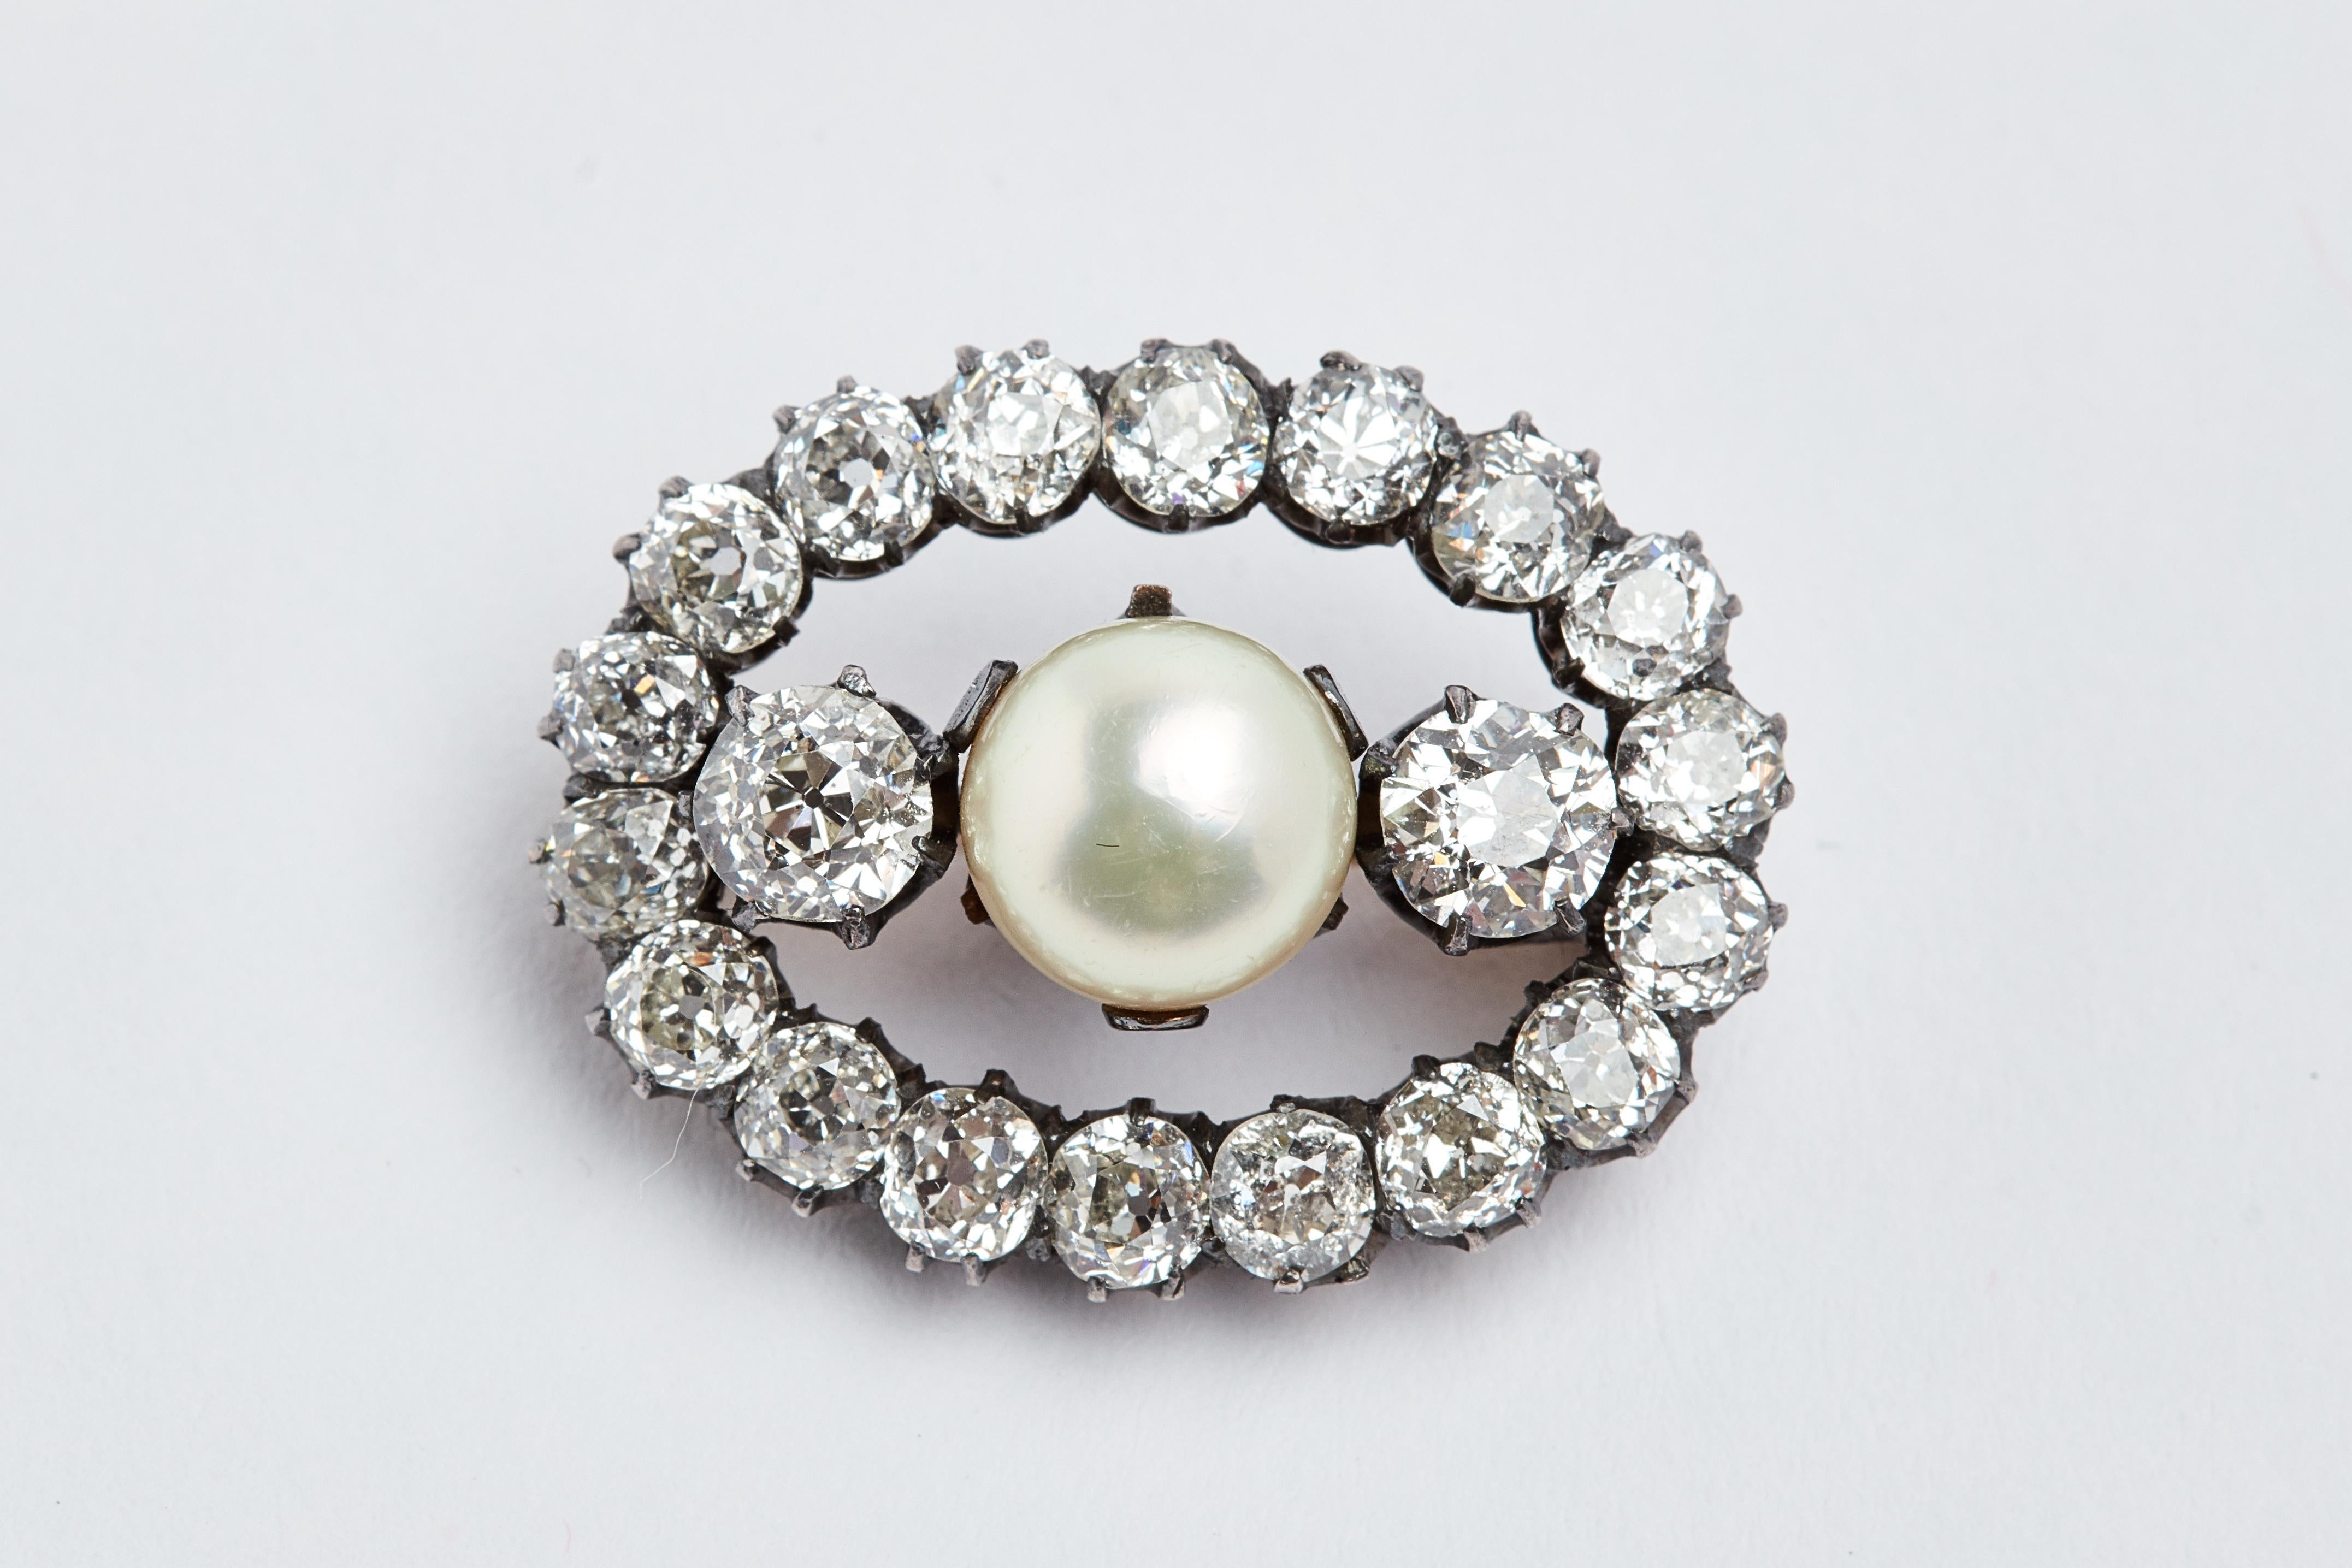 Women's Antique Oval Diamond and Pearl Brooch